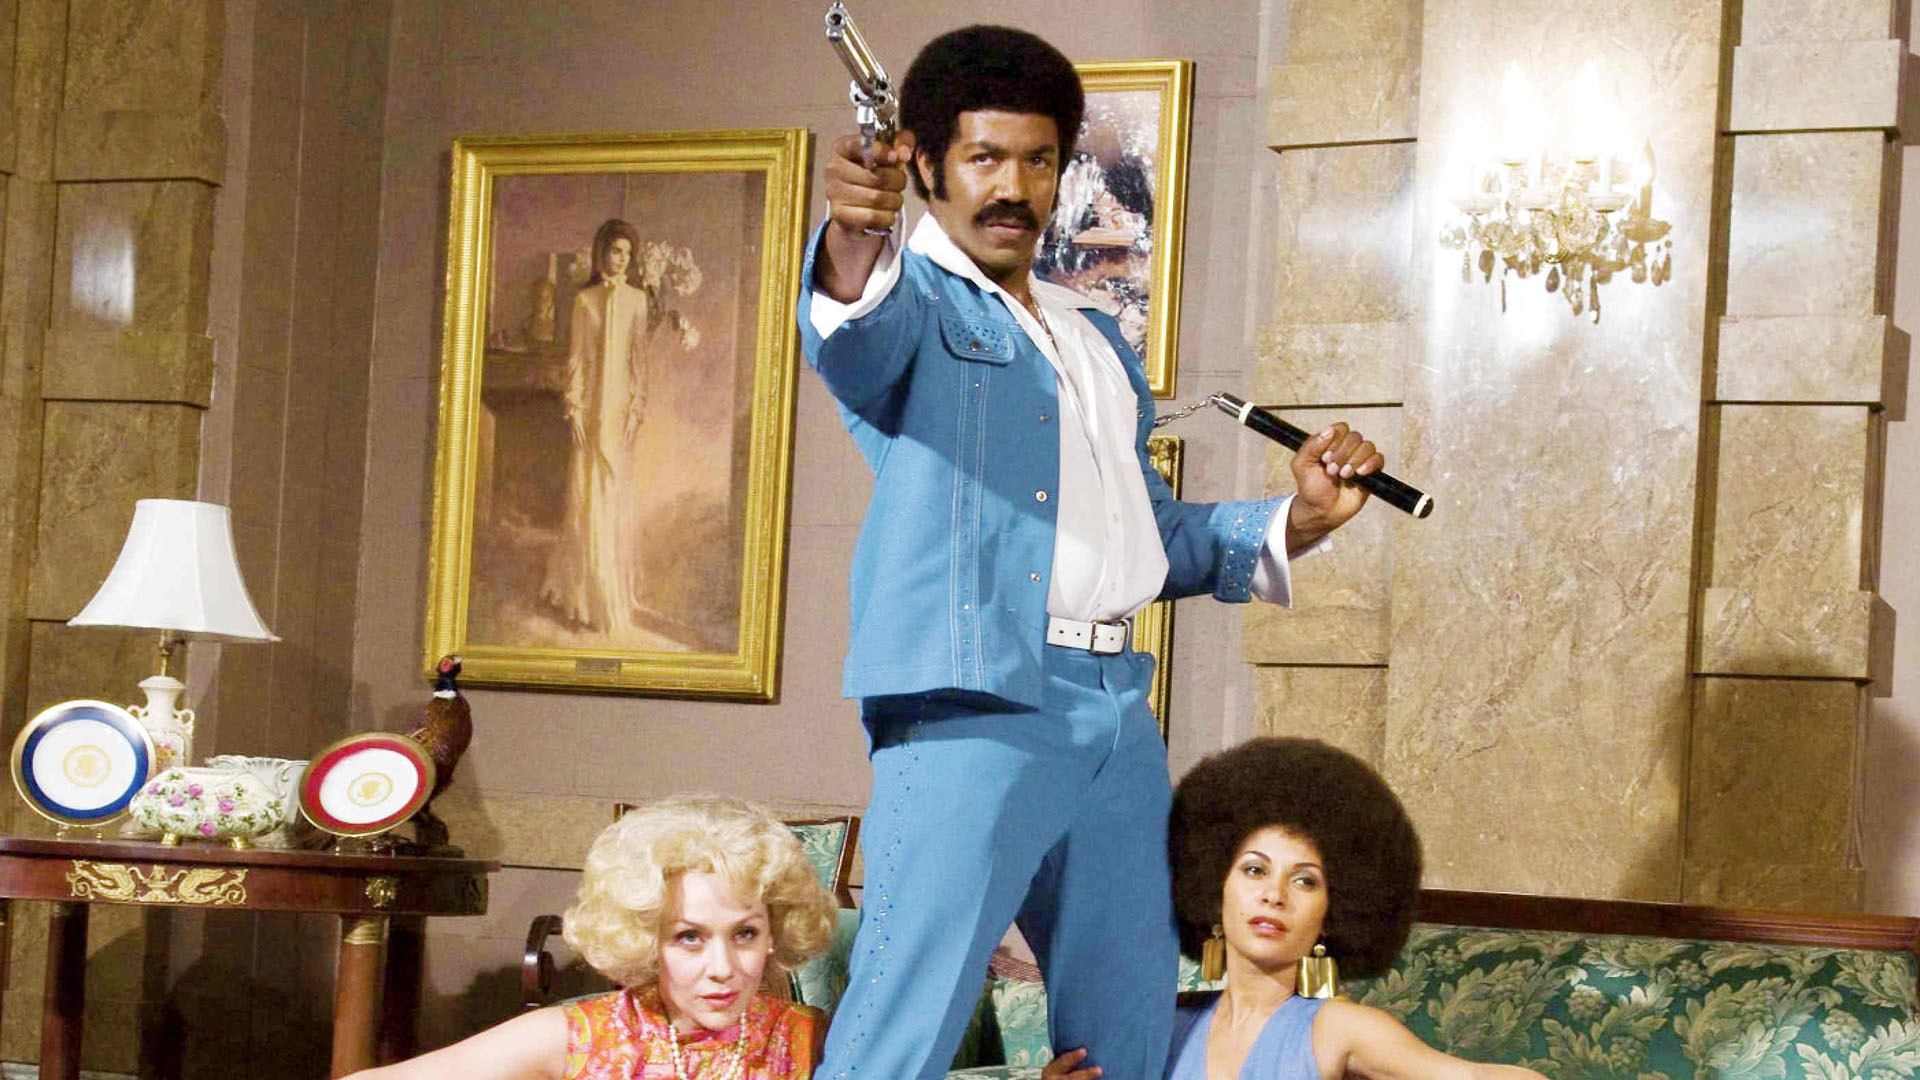 4 Black Dynamite HD Wallpapers | Backgrounds - Wallpaper Abyss